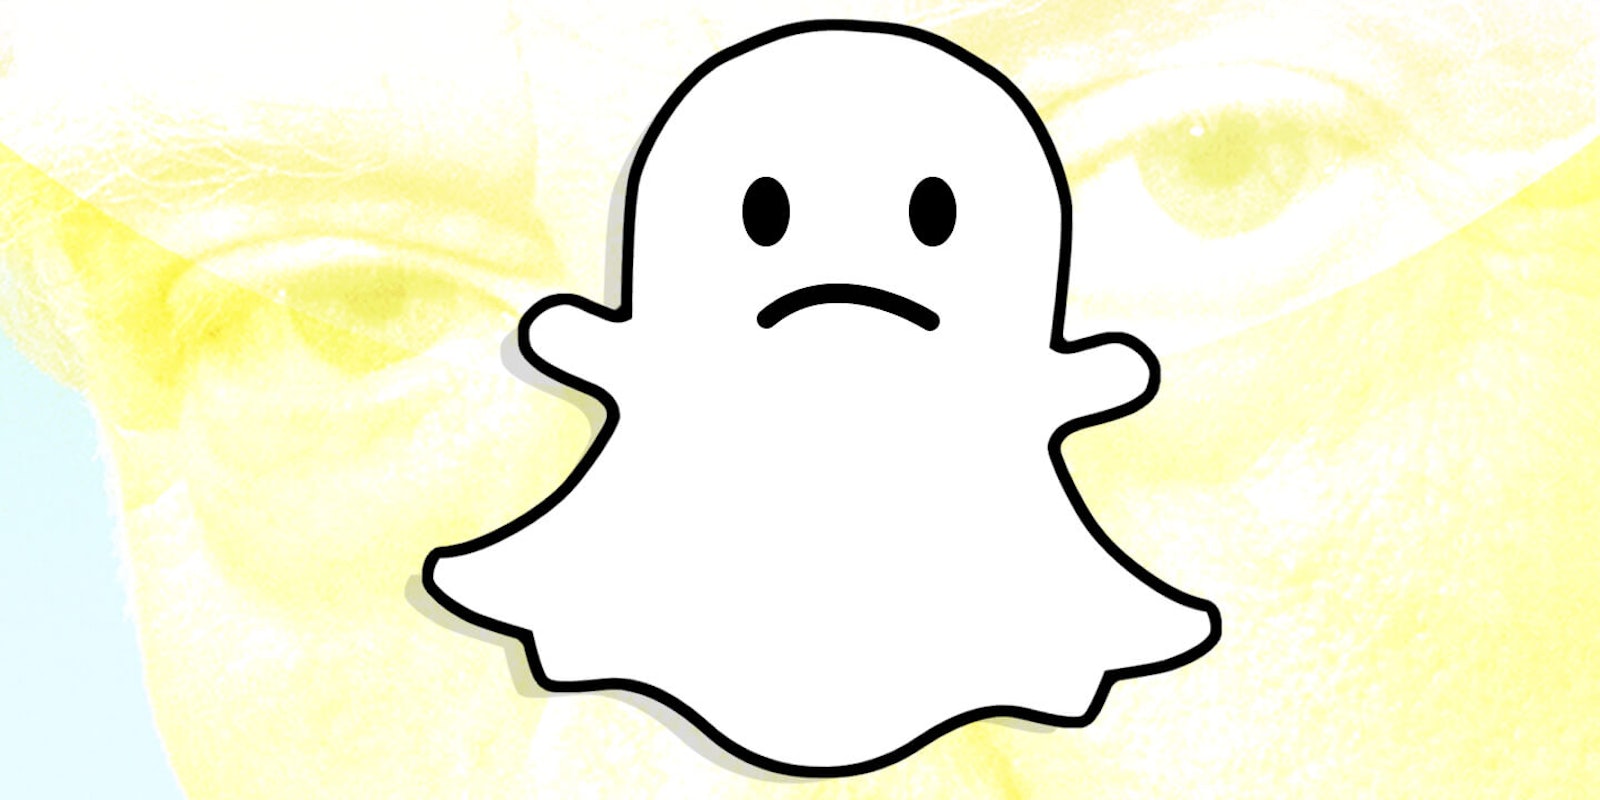 Snapchat ghost over Donald Trump background